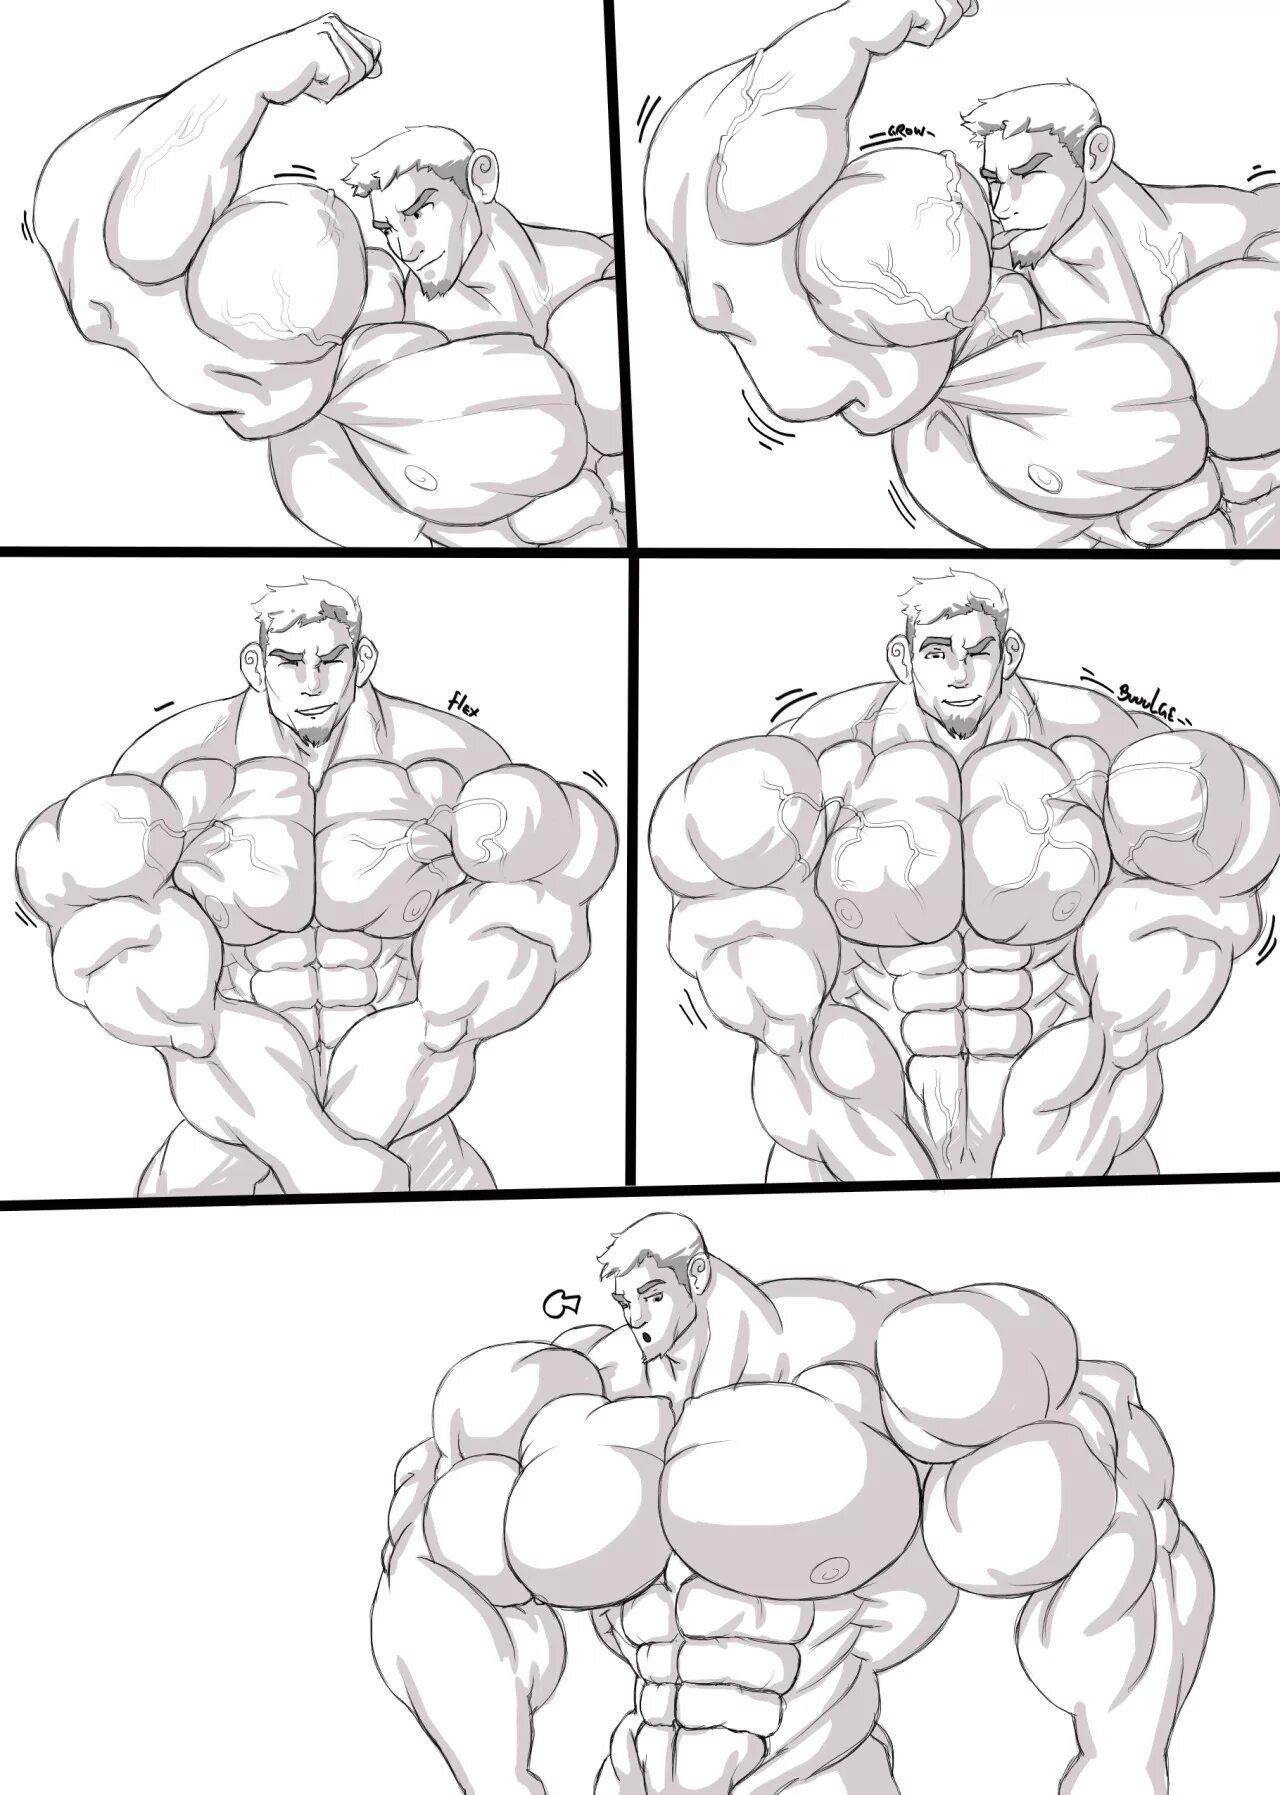 Dick expansion. Кольт muscle growth. Muscle growth Дэнни. Фрэнк muscle growth.